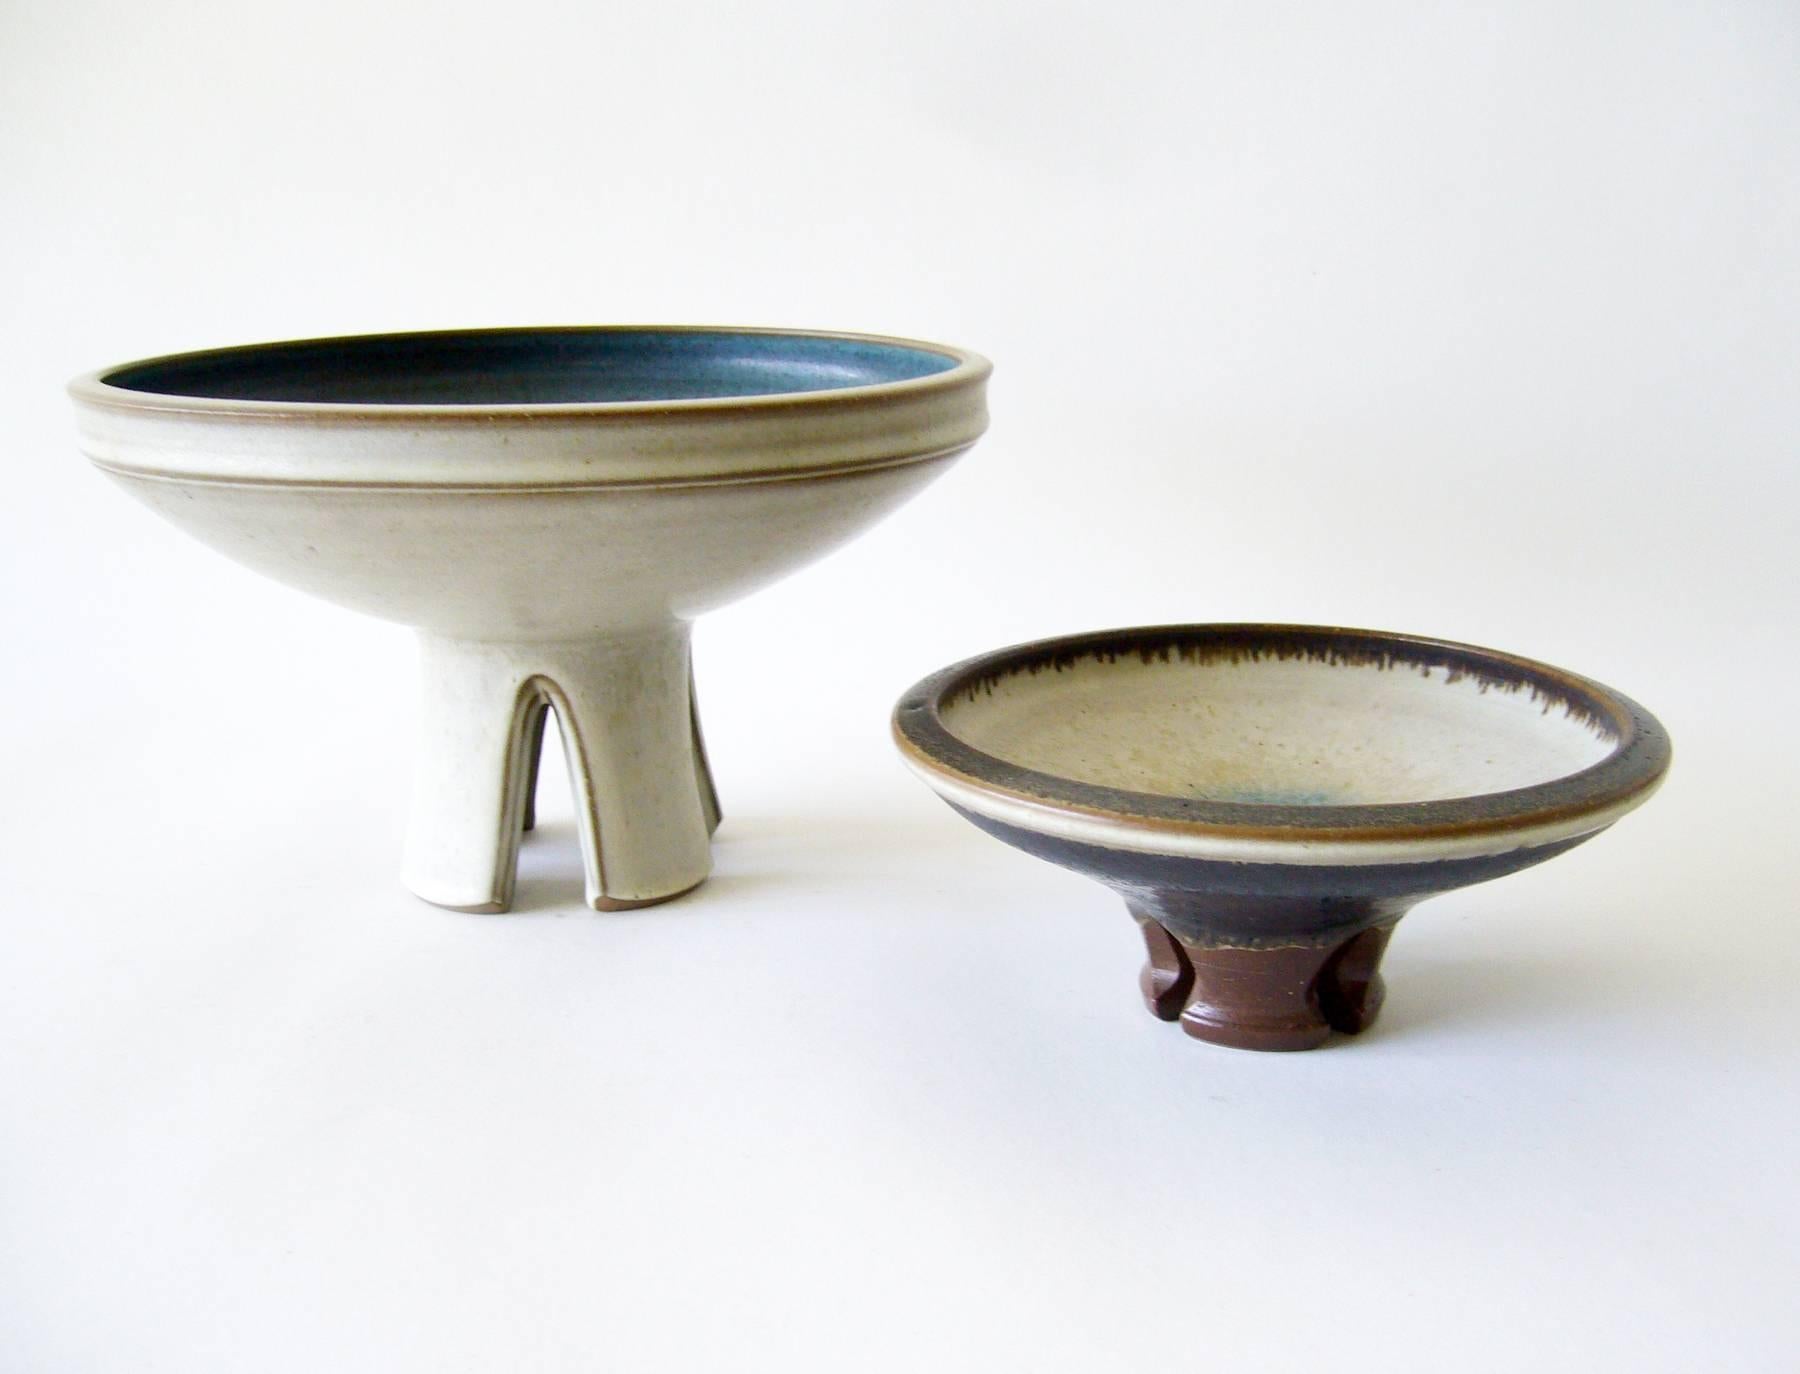 Pair of stoneware compotes created by Rupert Deese of Claremont, California. Larger of the two measures in 8